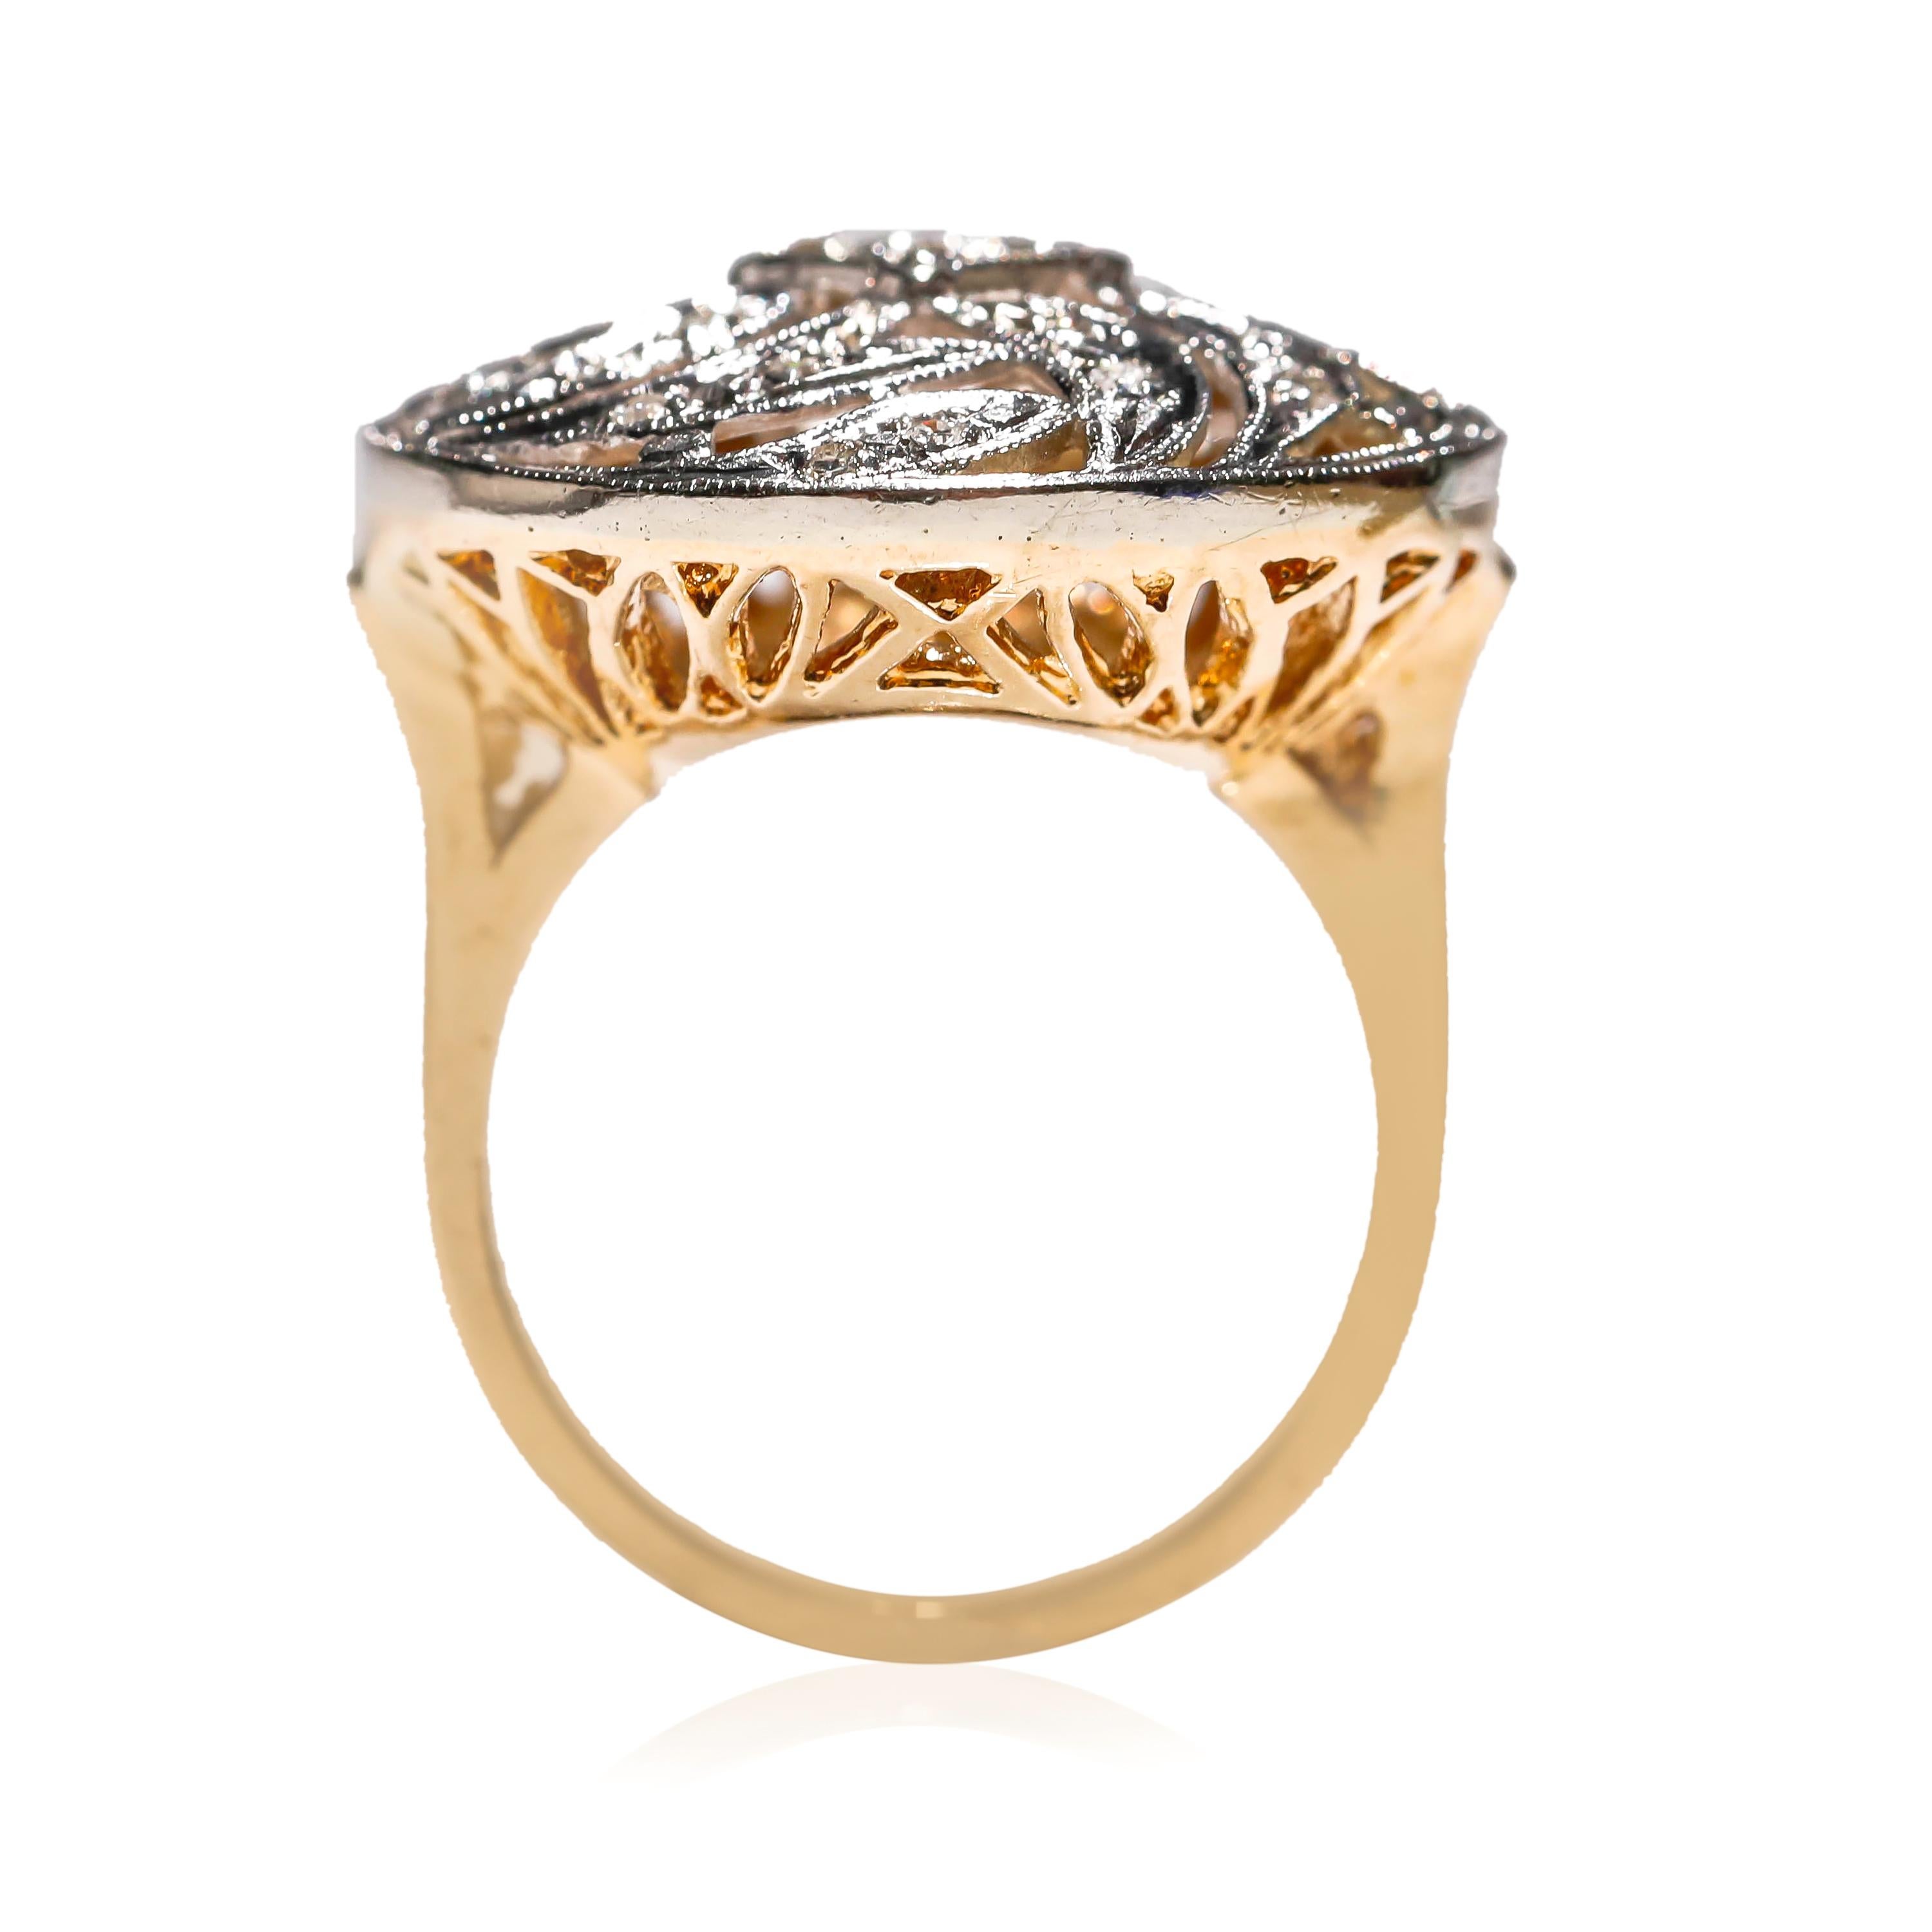 Estate 14 Karat Yellow Gold with 0.50 Carat Diamond Cocktail Ring Size 6.75

Uniquely designed this Estate ring will bring so much sparkle to your look. 0.50 CTW of glistening round diamonds a set on top of the ring in pave setting, fashioned in 14k